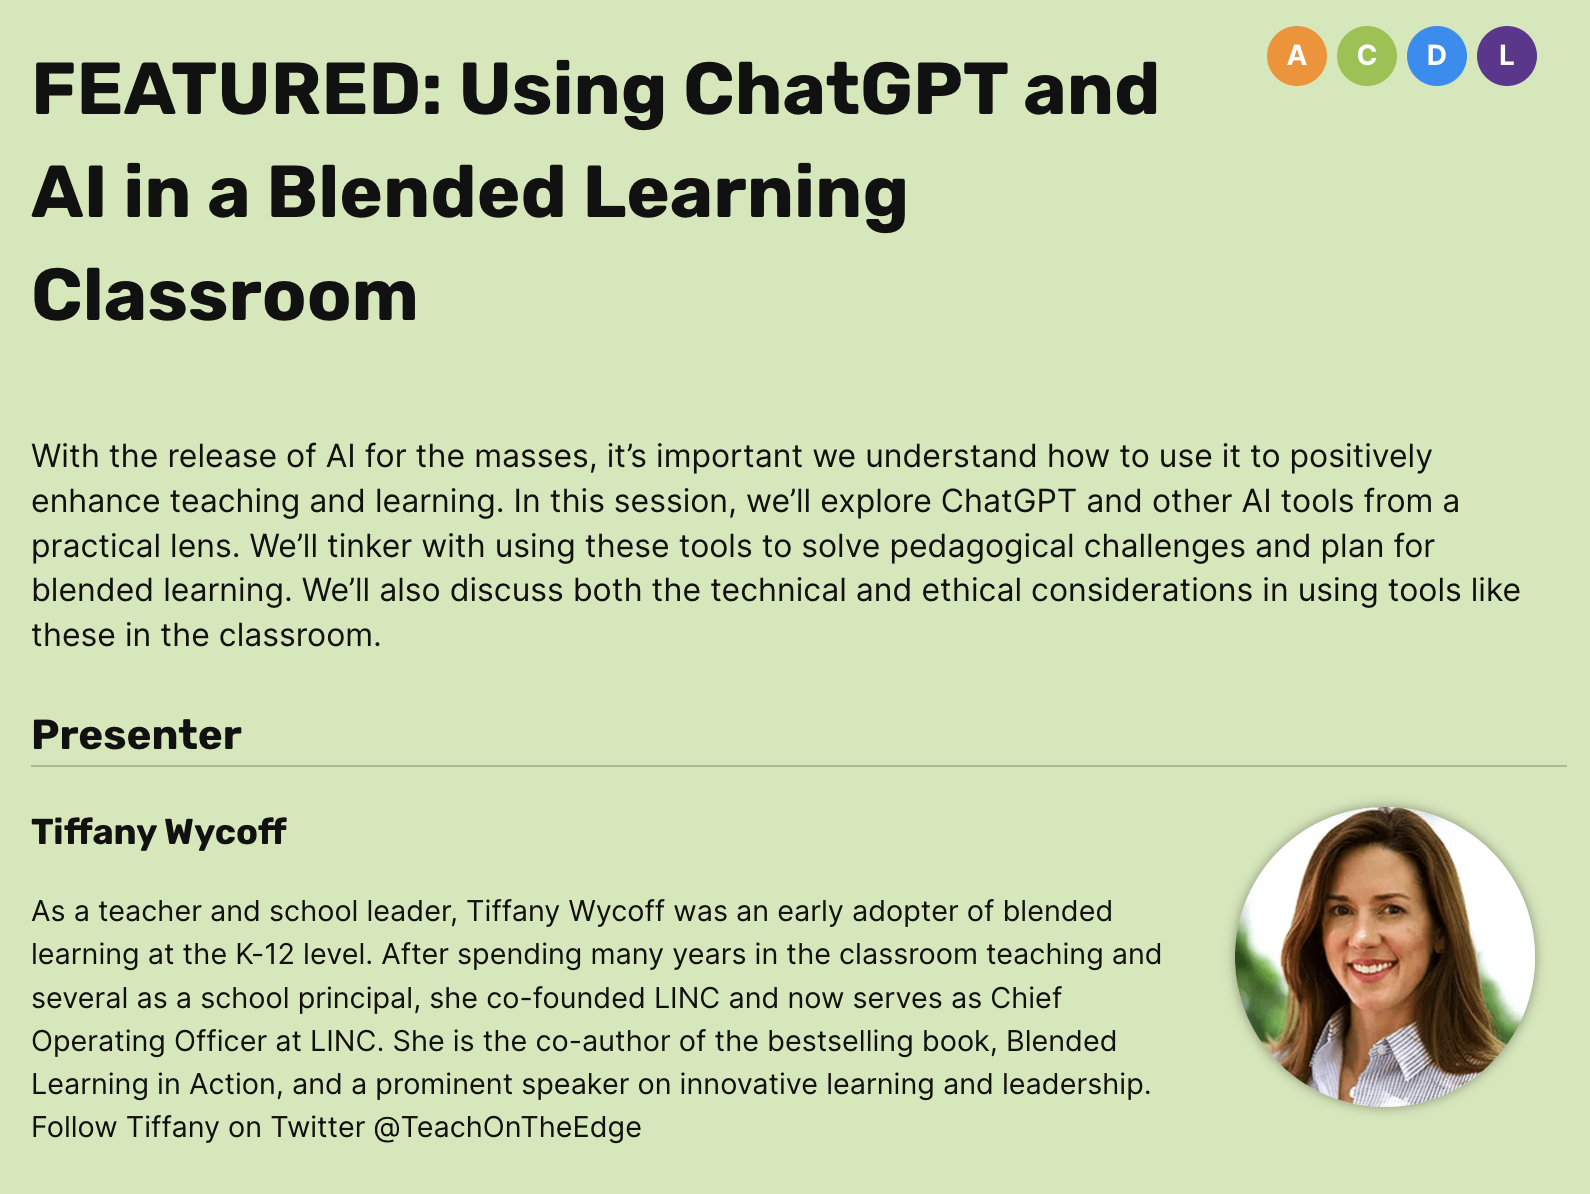 Using ChatGPT and AI in a Blended Learning Classroom